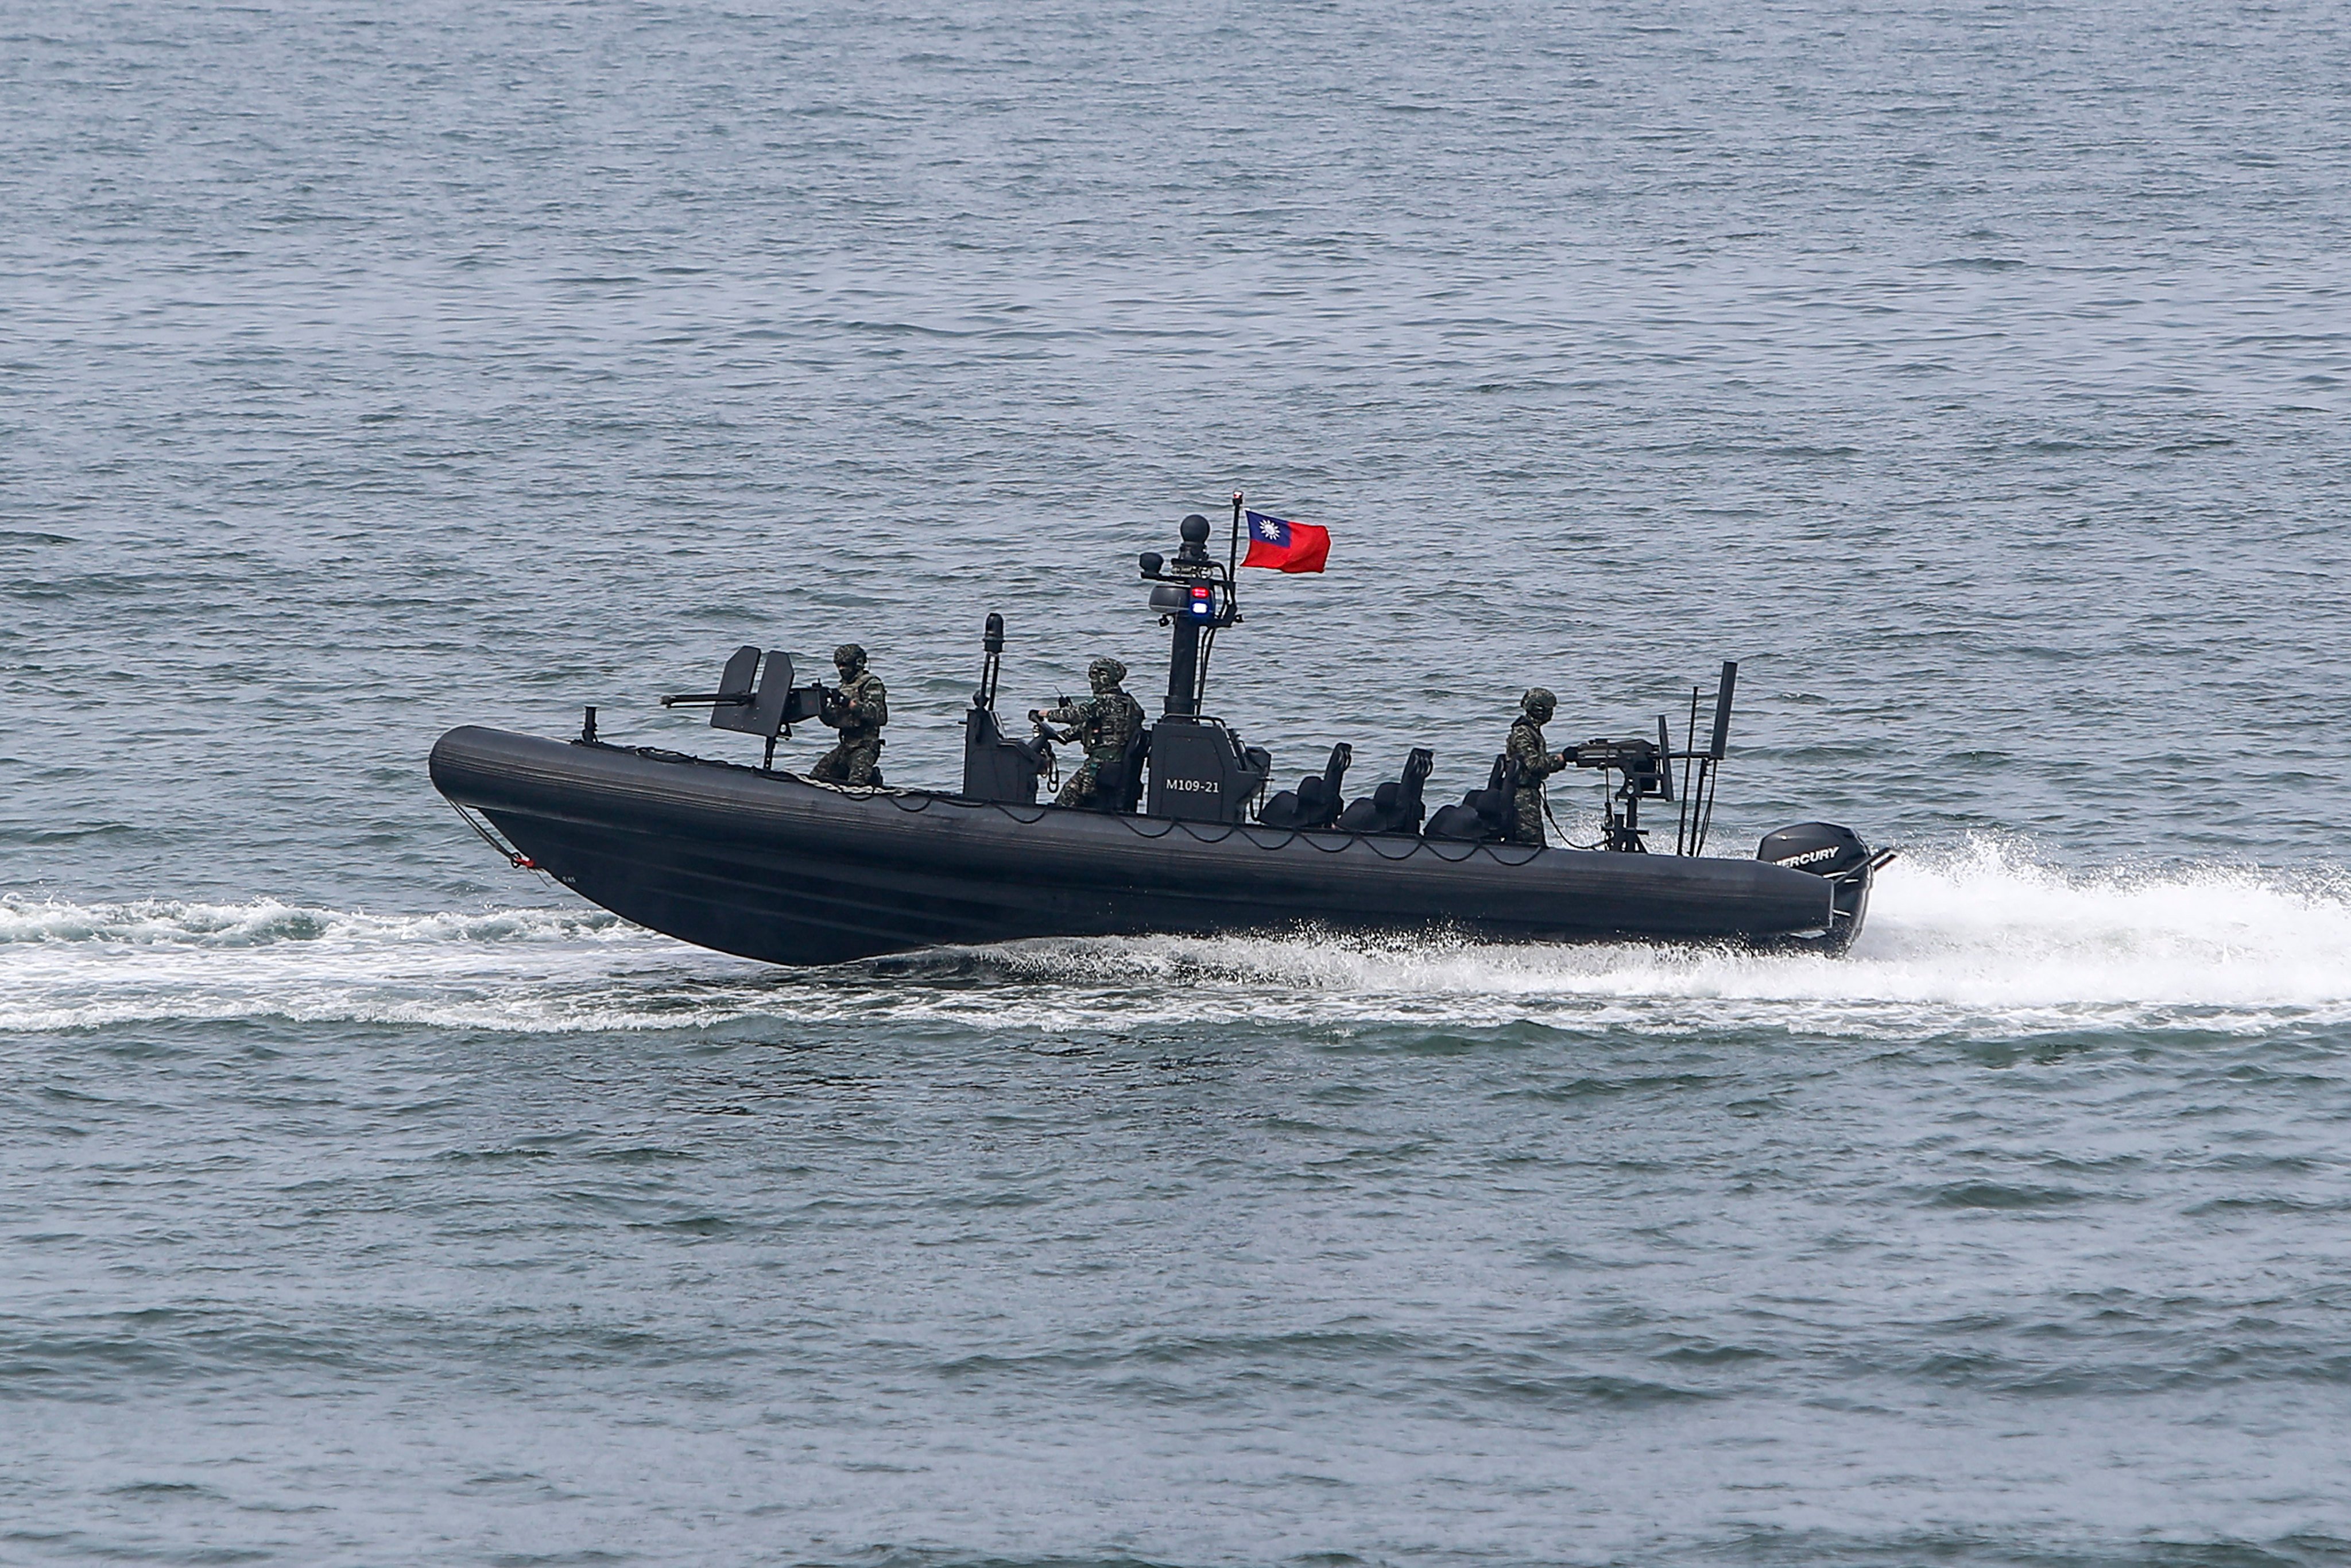 Navy soldiers on an assault boat conduct manoeuvre training during a military drill in Kaohsiung City, Taiwan, in January 2023, in response to recent renewed threats from mainland China. Photo: AP